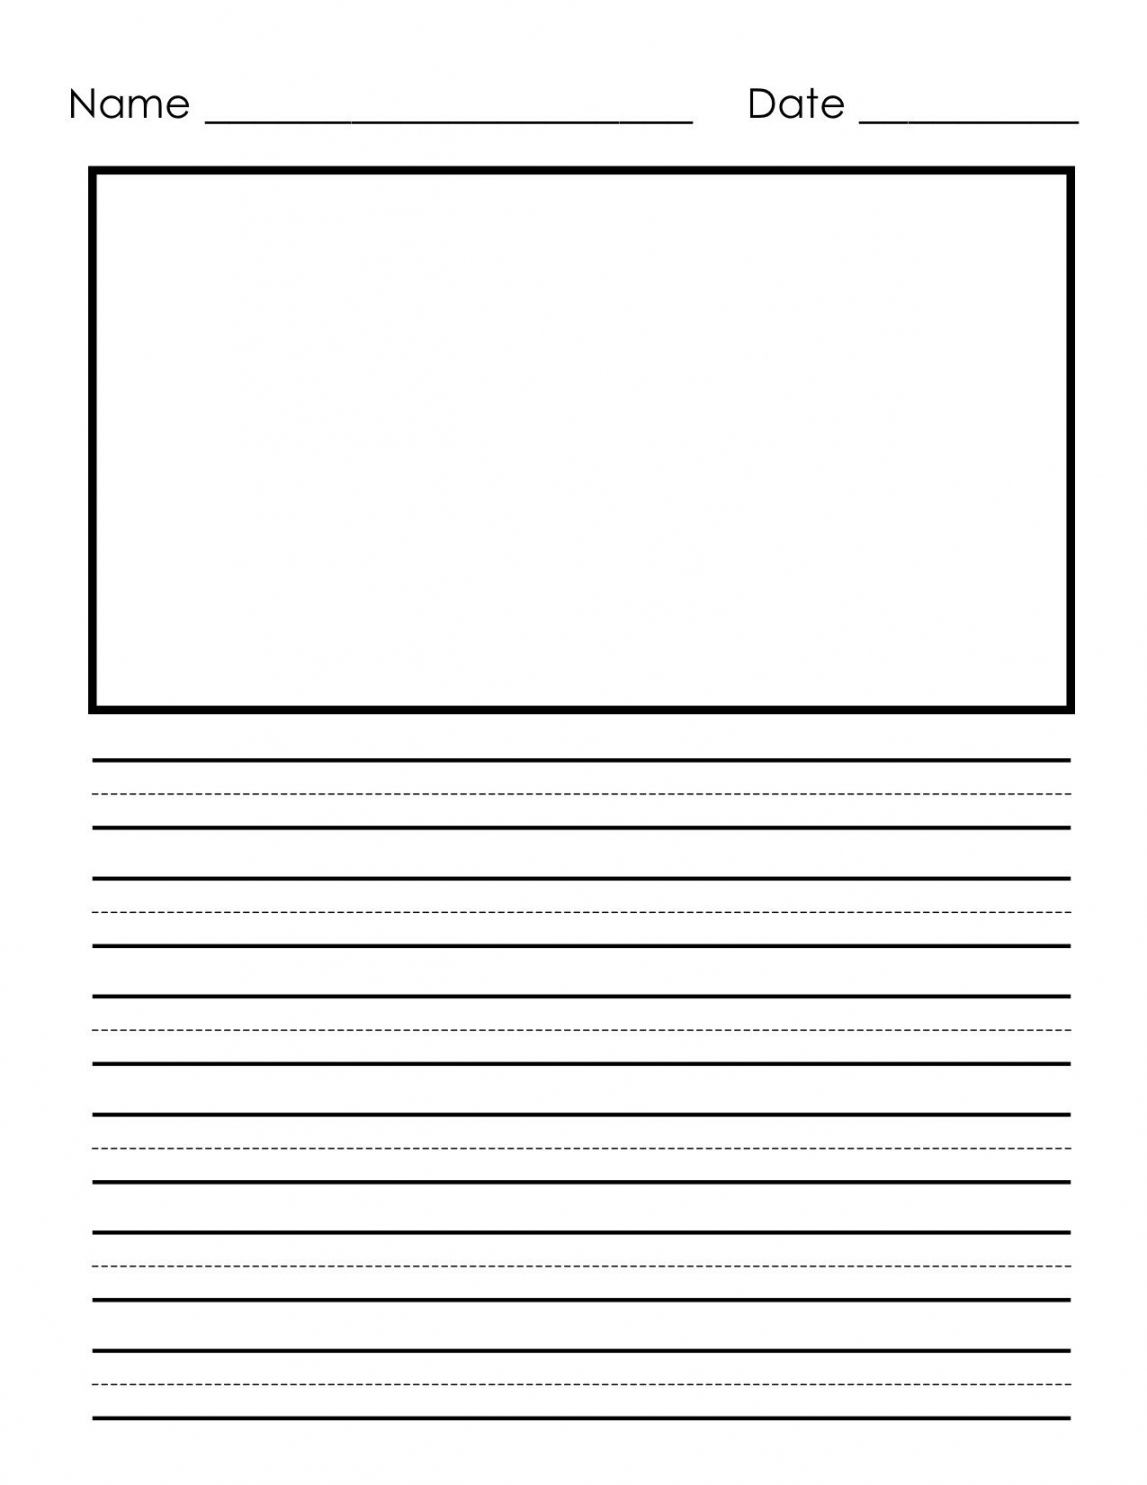 Pin on Home School Resources - FREE Printables - Printable Lined Paper For Kindergarten